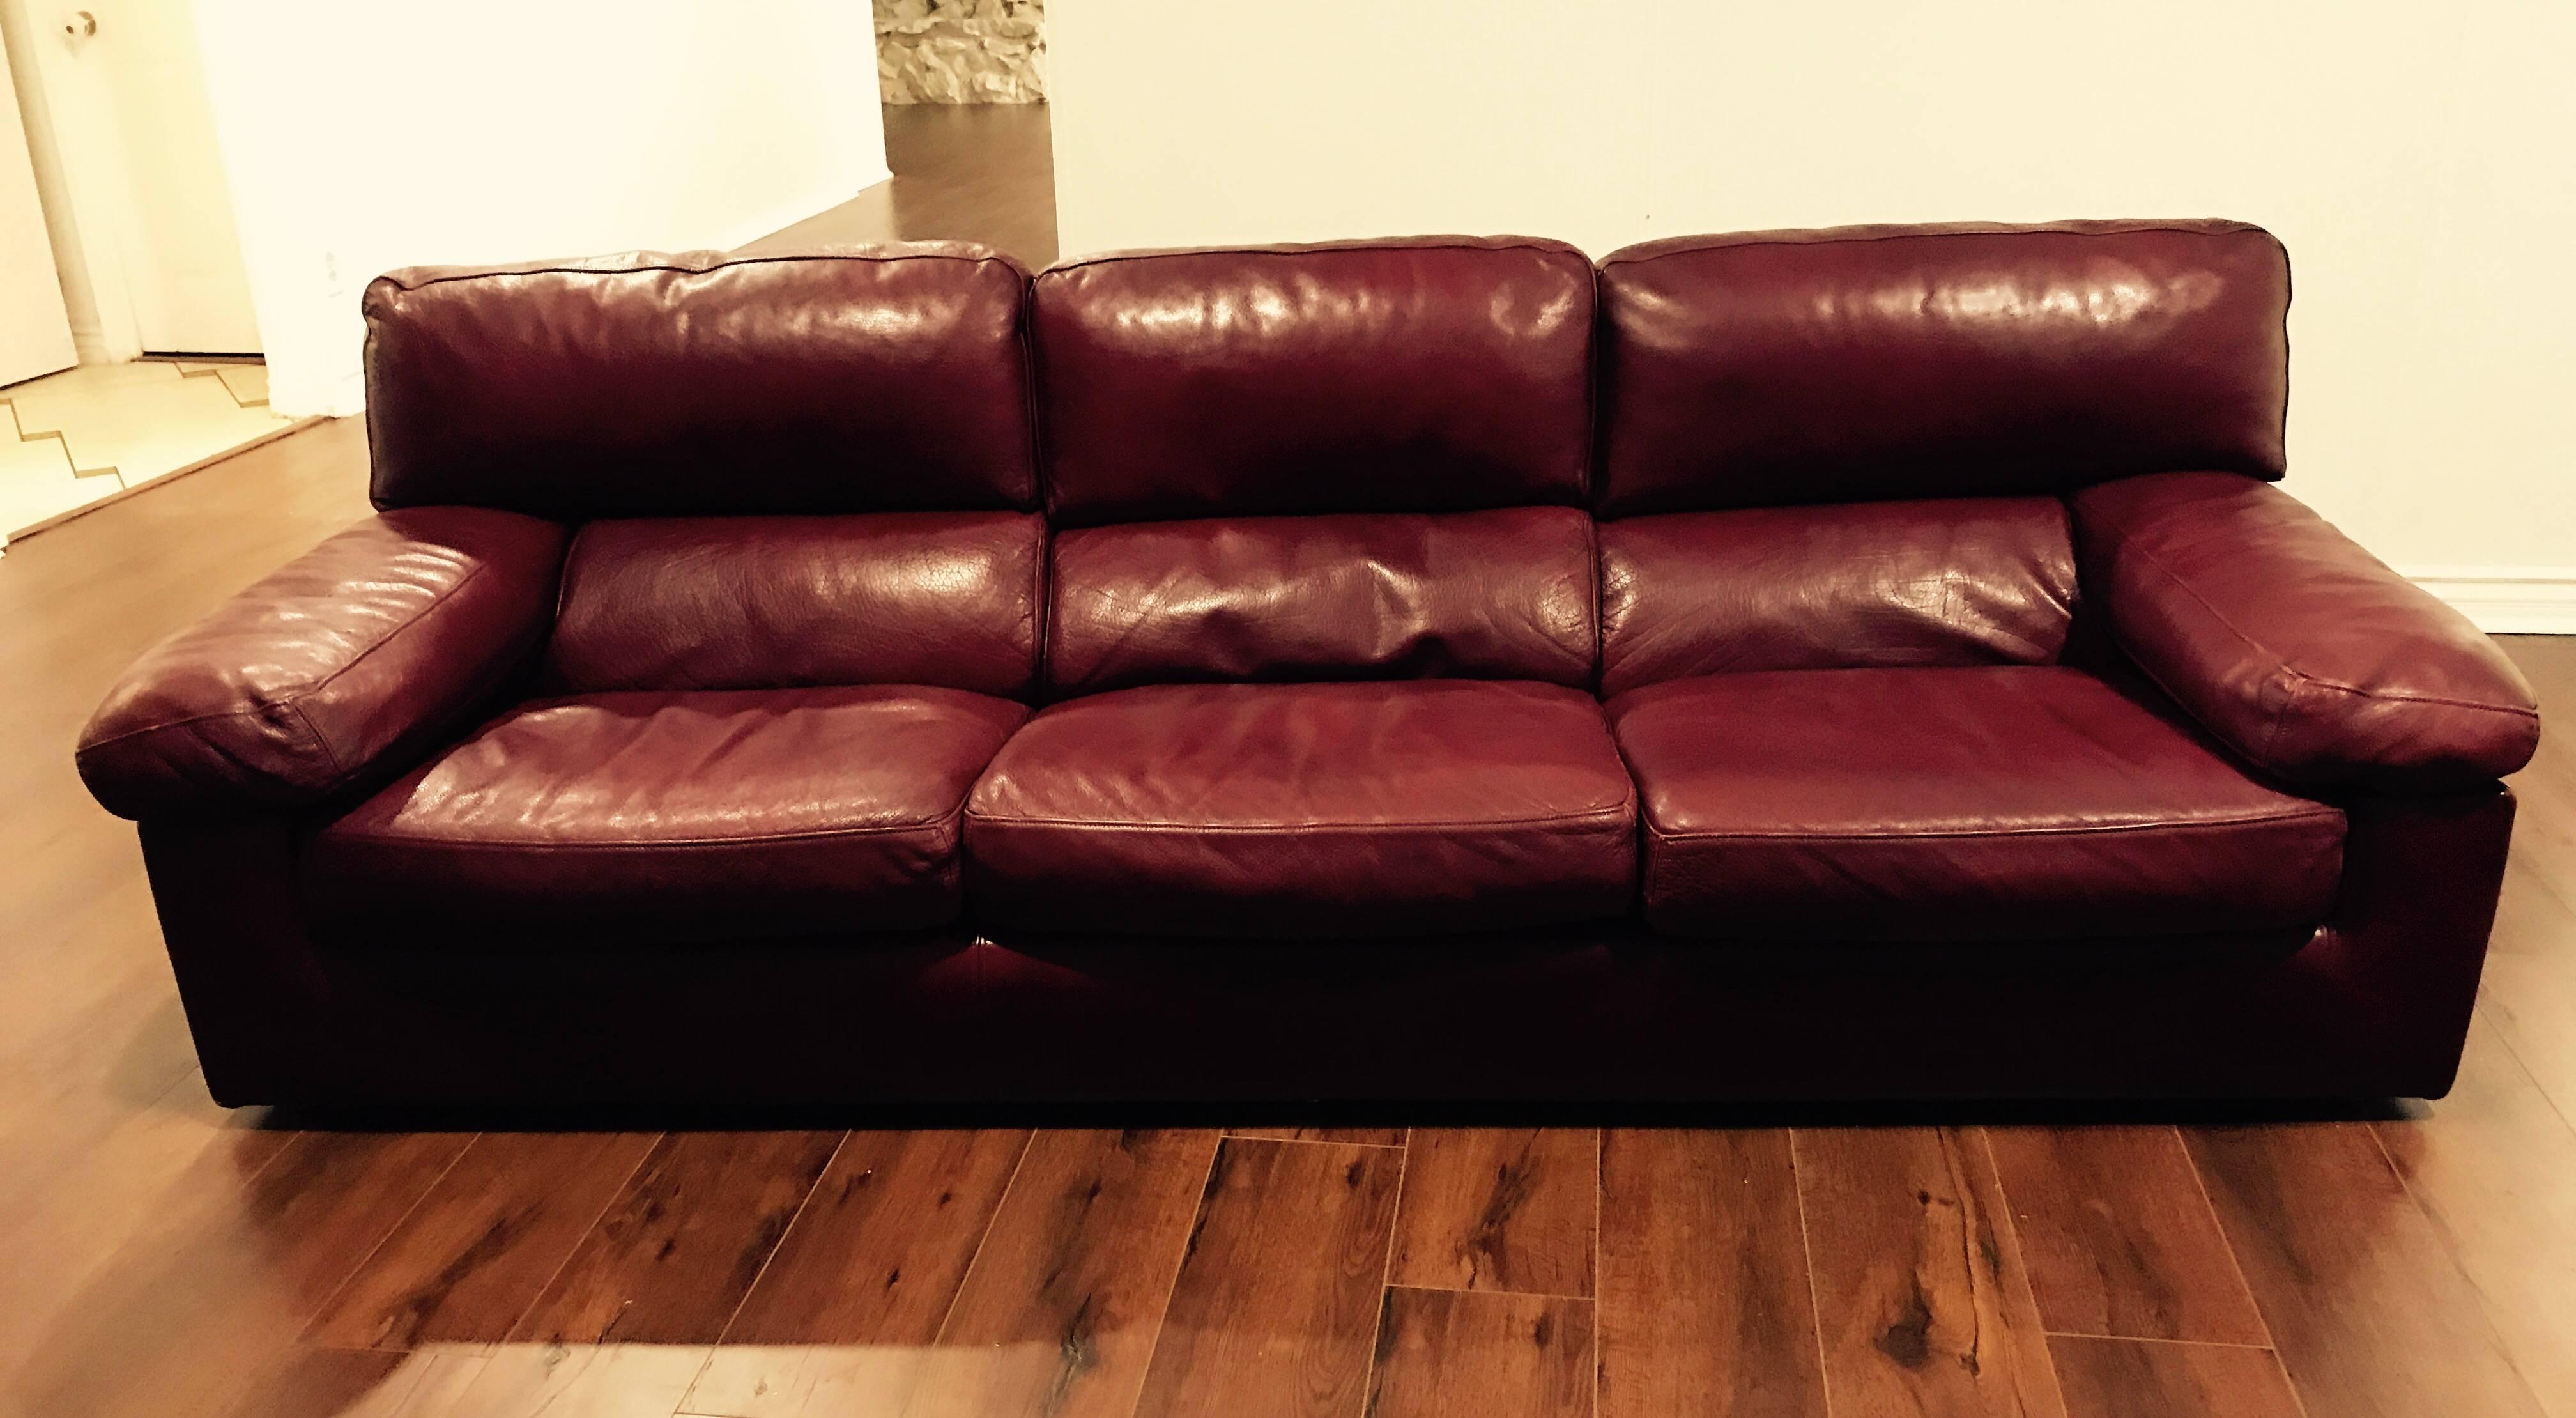 A wonderful 1980s burgundy leather down filled sofa by the French maker, Roche Bobois. It has a great warm patina to the leather and is very comfortable. The high quality bull leather is a oxblood/cardovan color. Matching loveseat available. The